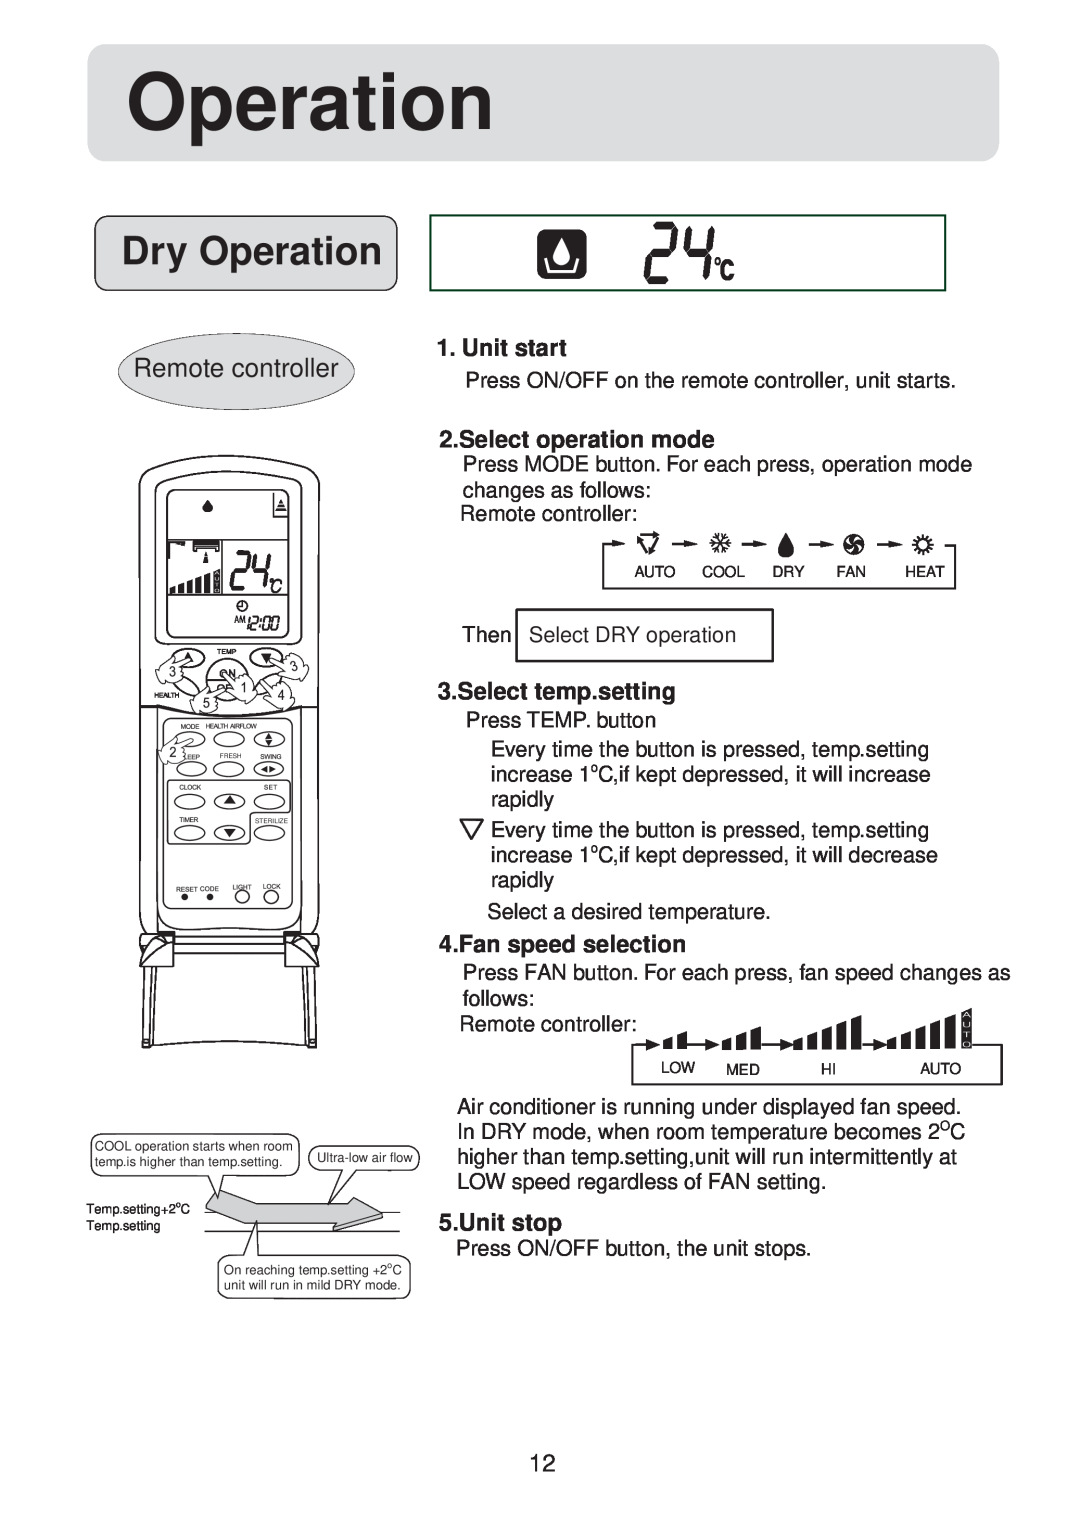 Haier HSU-12HV03/R2(SDB) Dry Operation, Remote controller, Unit start, Select operation mode, Select temp.setting 